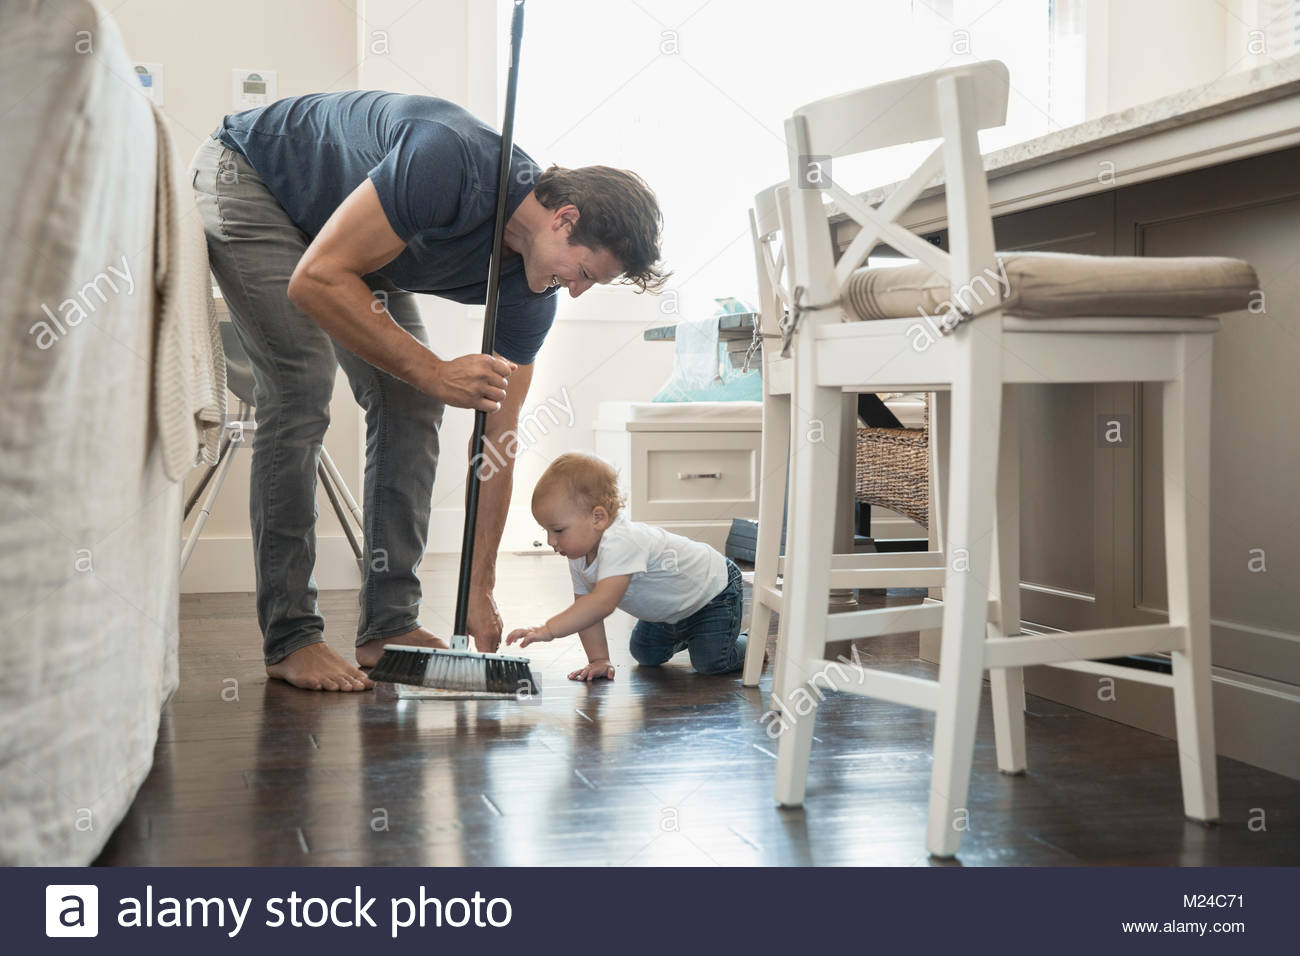 Baby son watching father sweeping floor Stock Photo